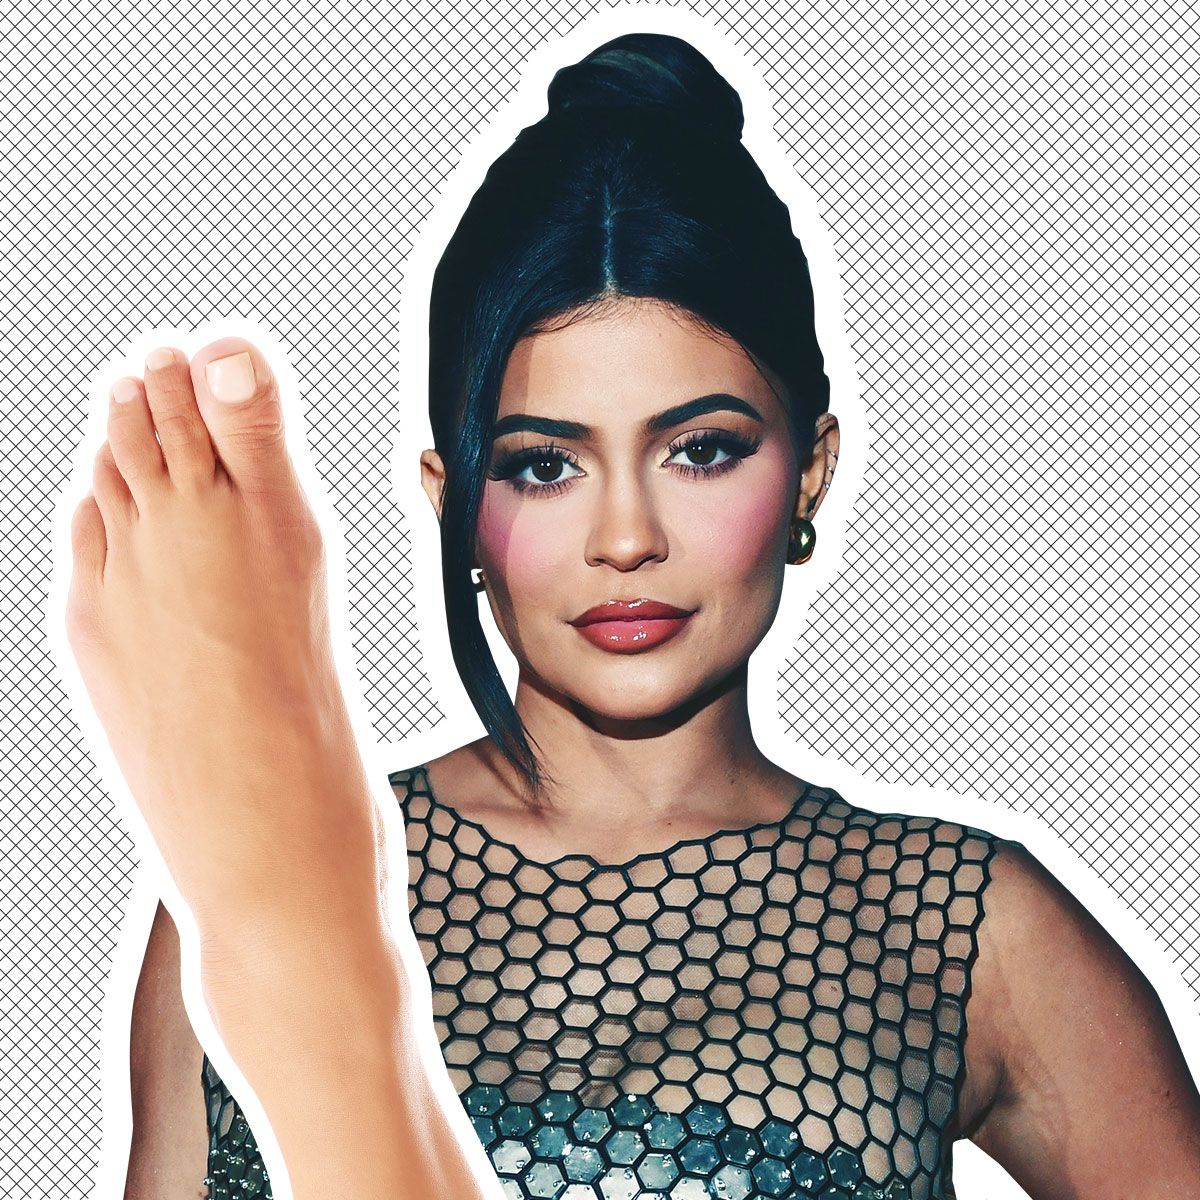 Bottom of female feet getting fucked Kylie Jenner Feet Pics Stir Up Controversy